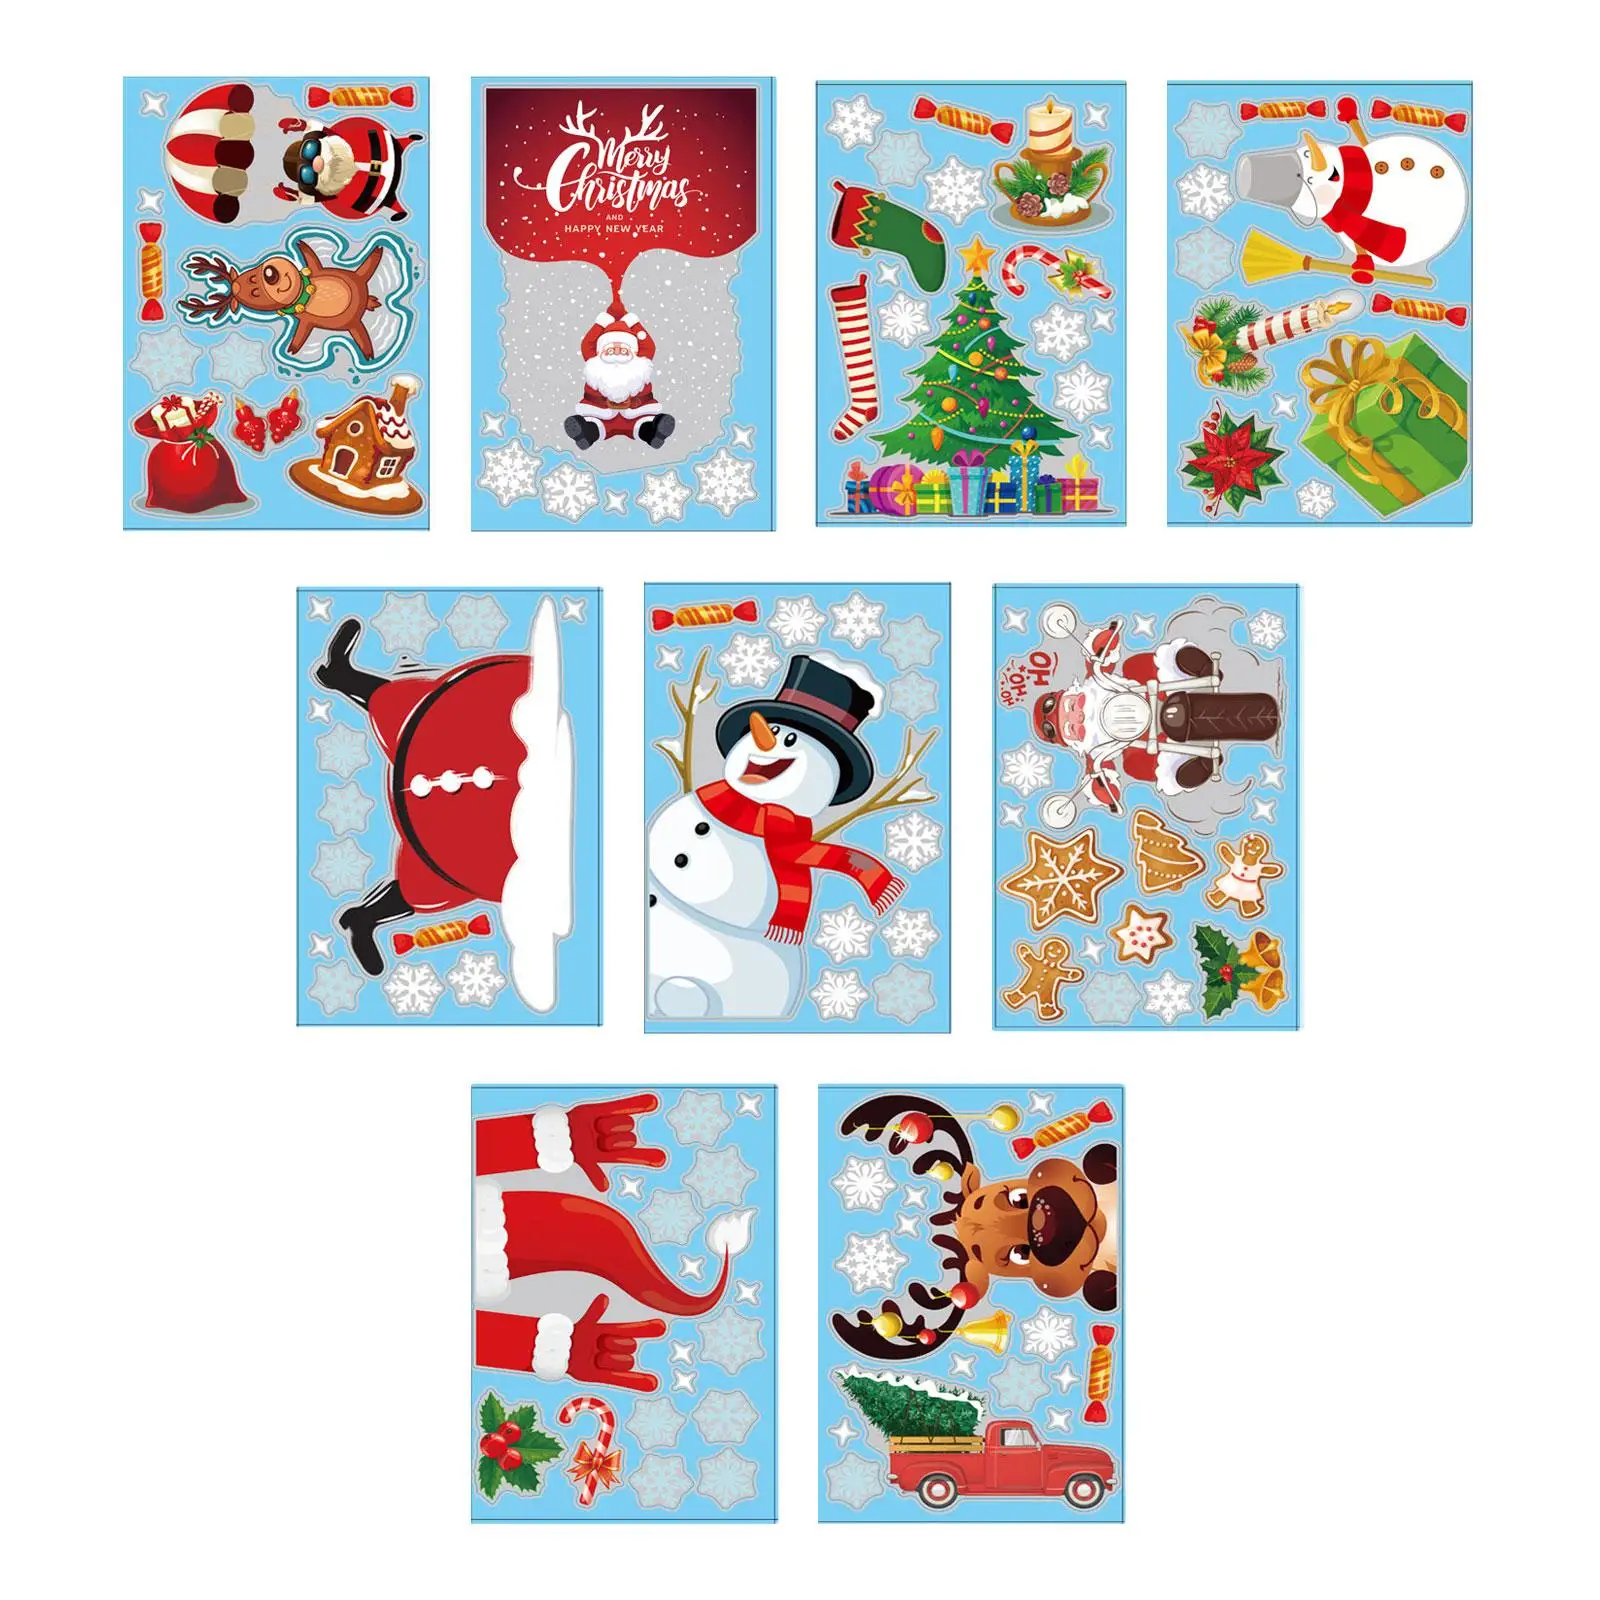 9Pcs Christmas Window Clings Door Mural DIY Christmas Tree Snowman Stickers Xmas Decal for Party Winter Holiday Bedroom Kitchen